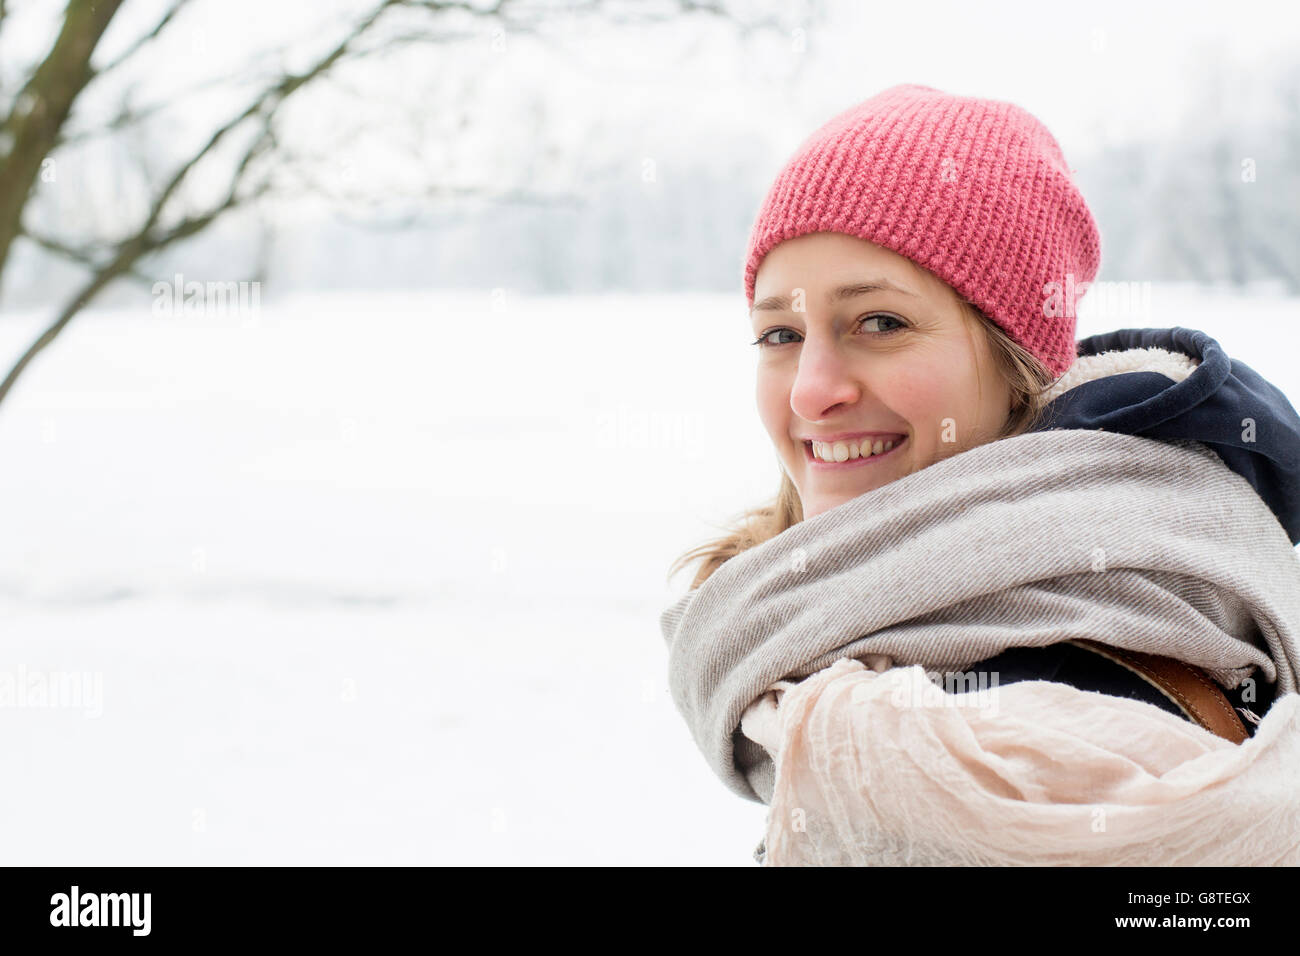 Mid adult woman with knit hat and scarf in winter Stock Photo